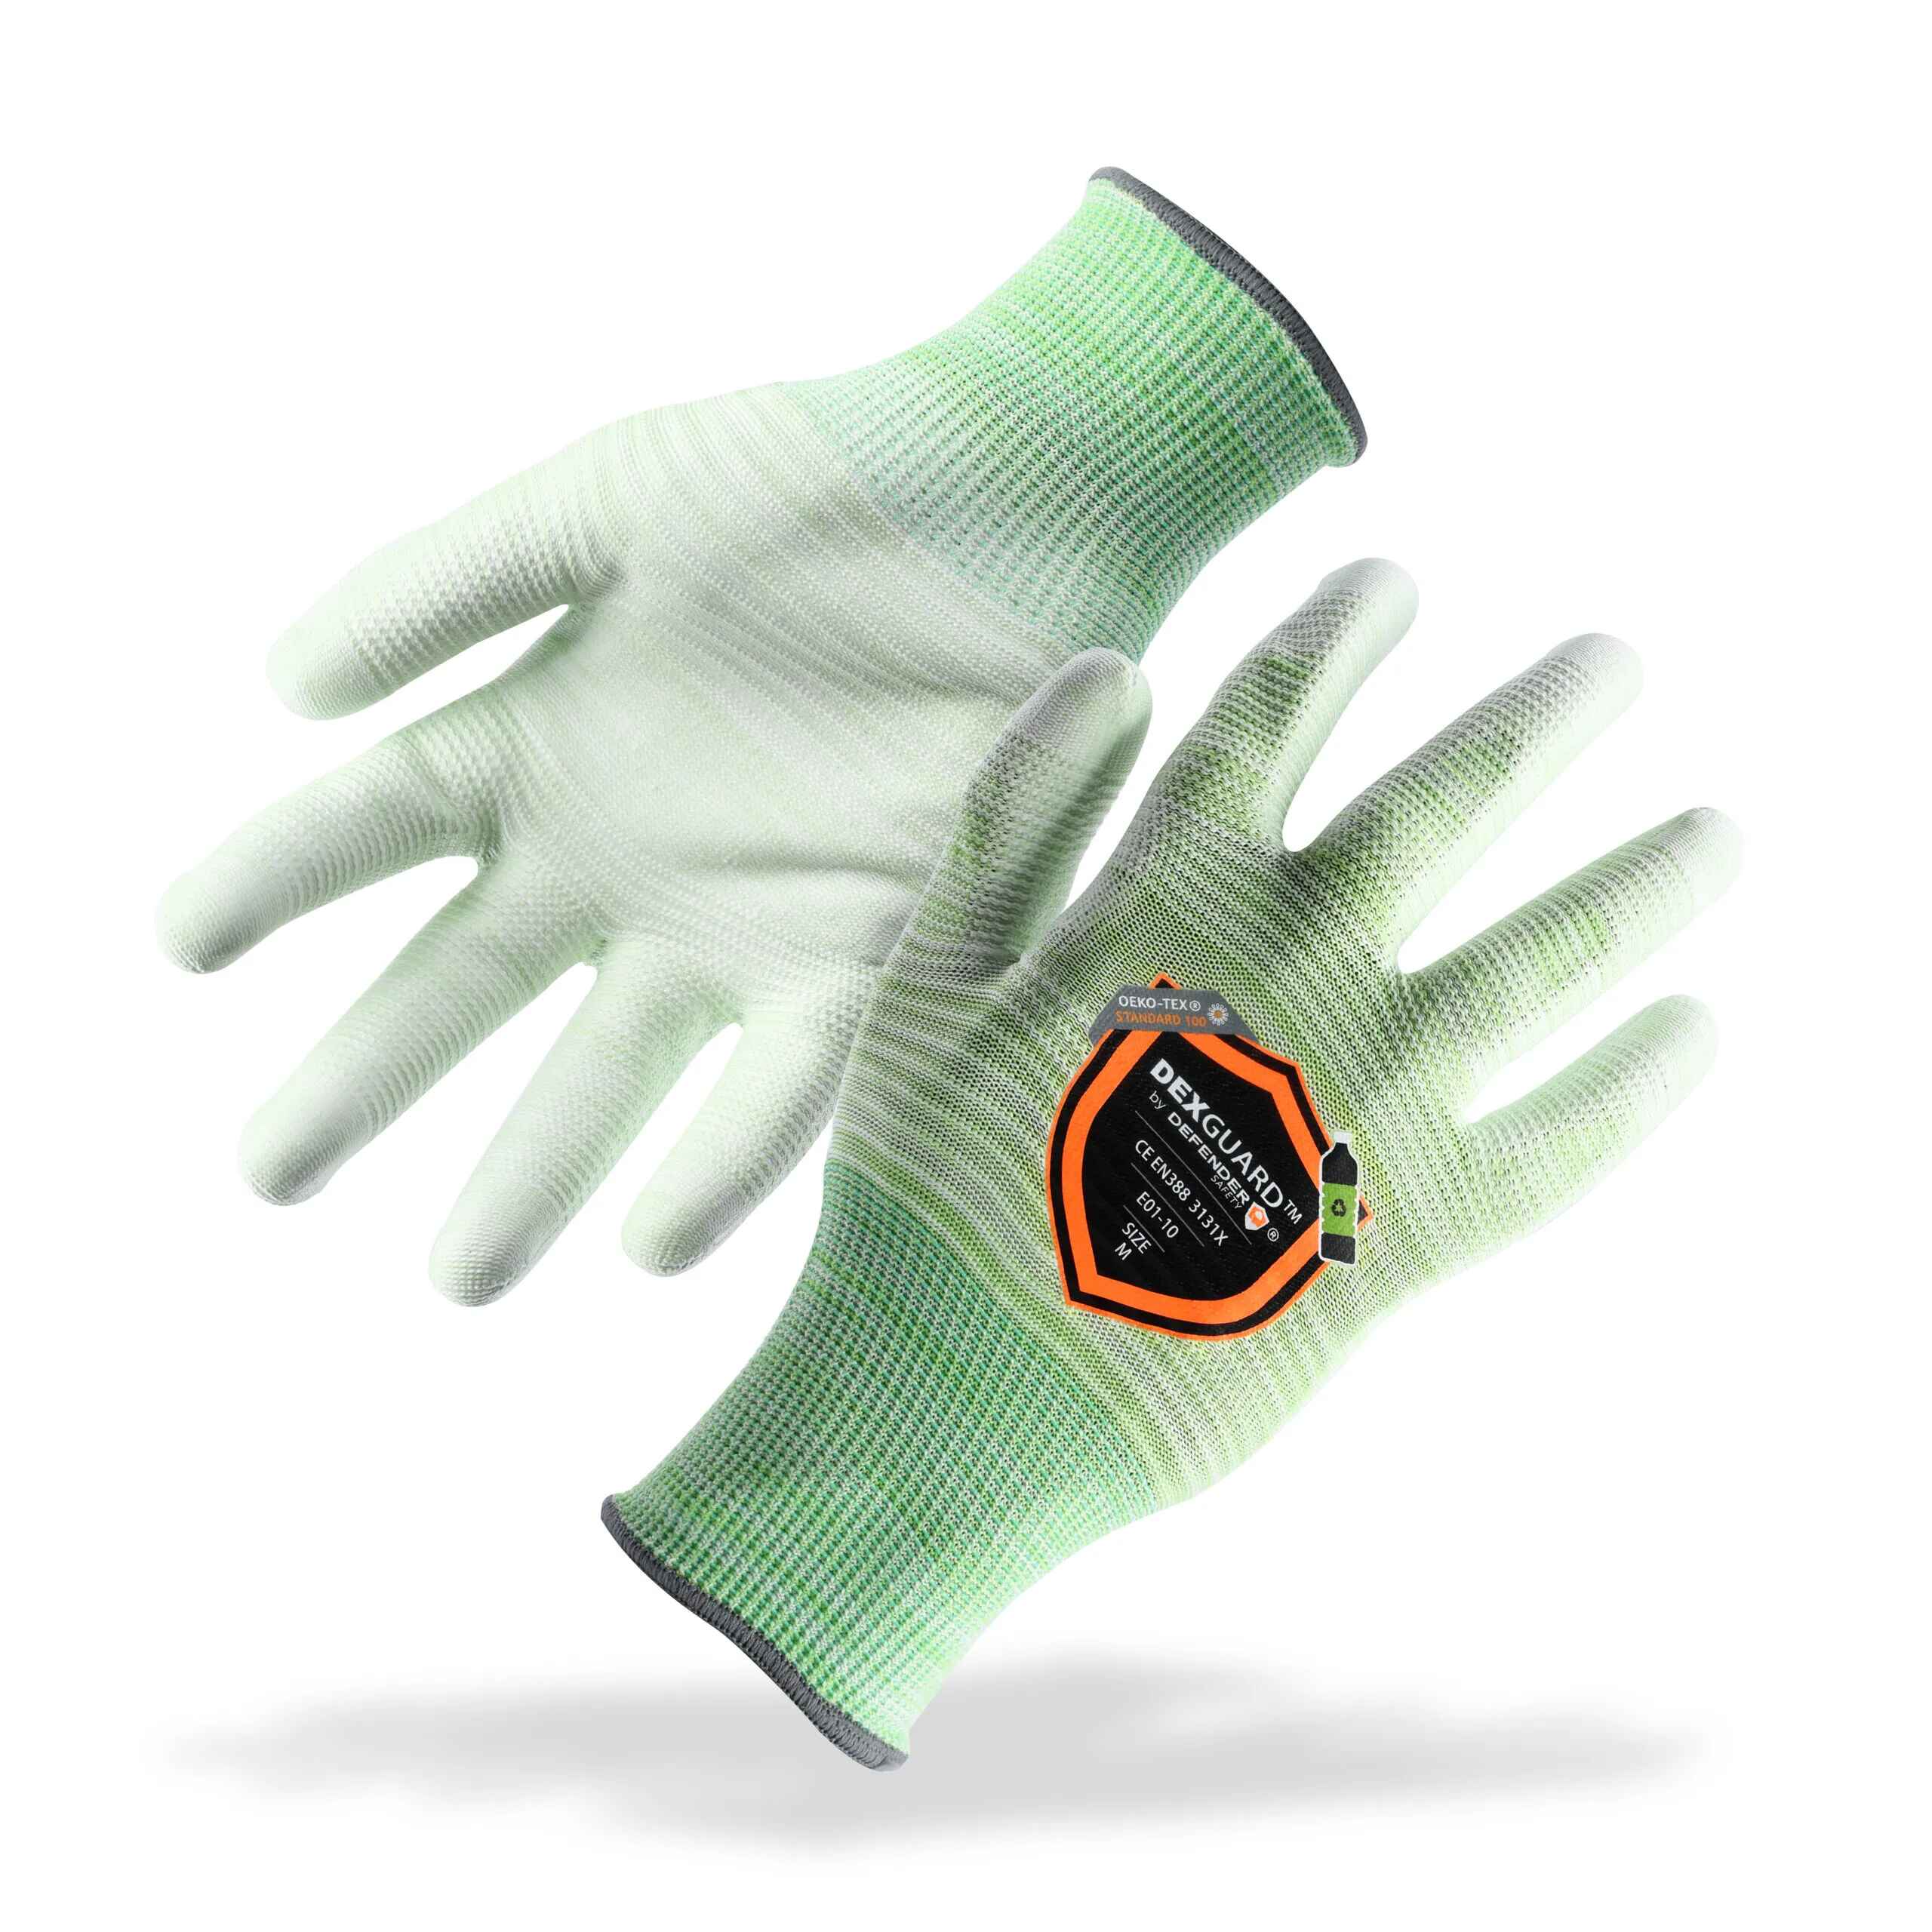 Nitrile Dipped Cut Safety Gloves – EZ ON THE EARTH